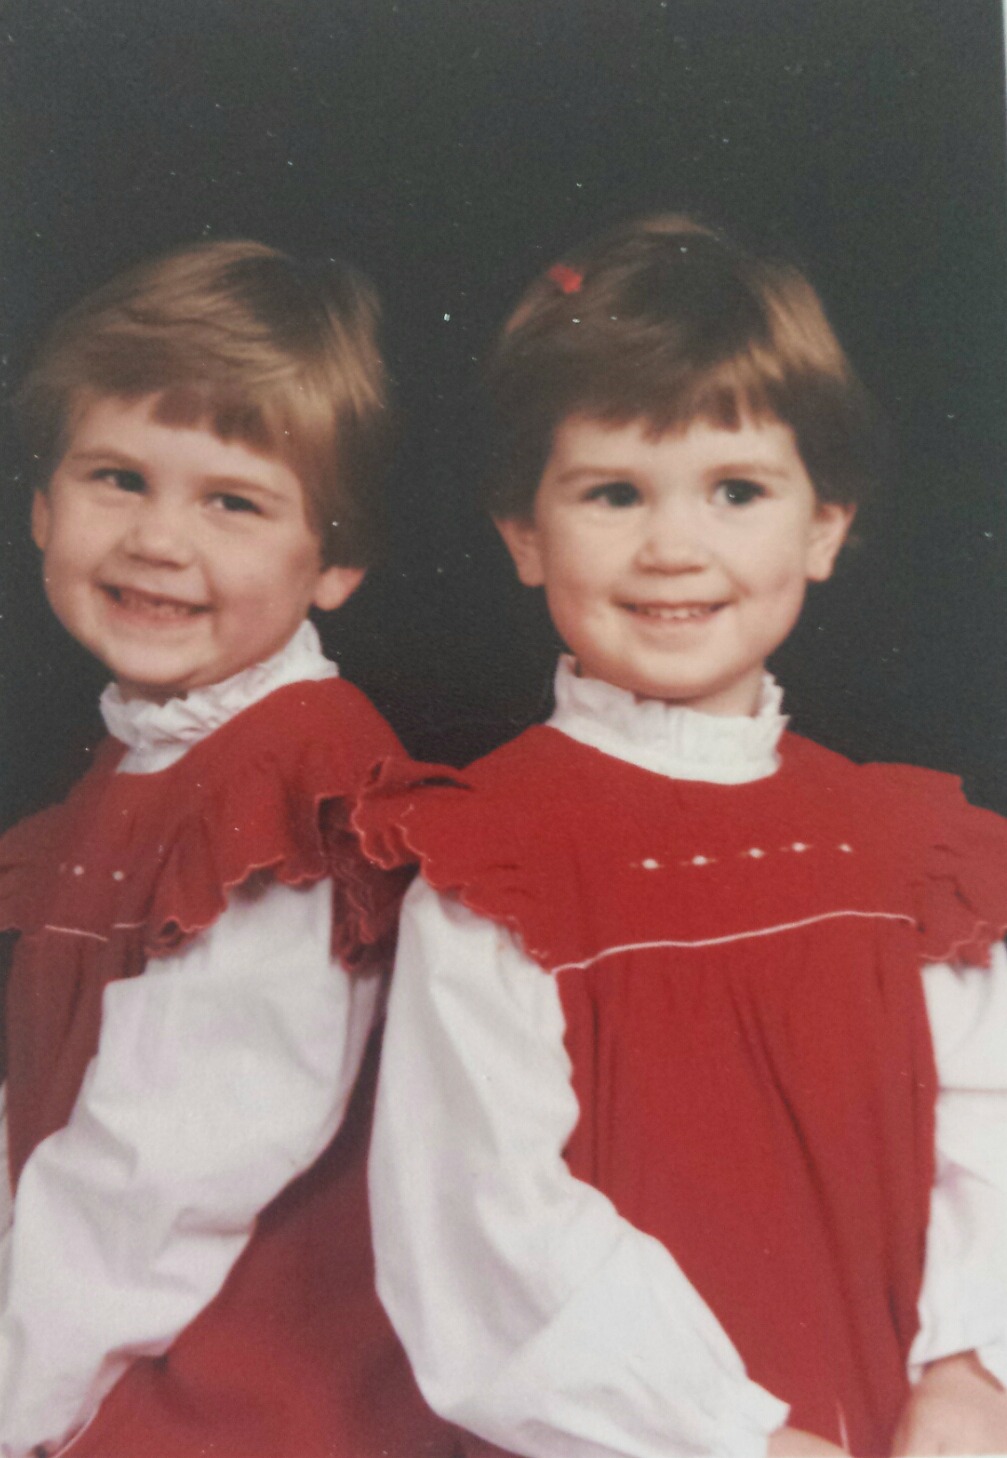 My sister and I in the very early 90s.